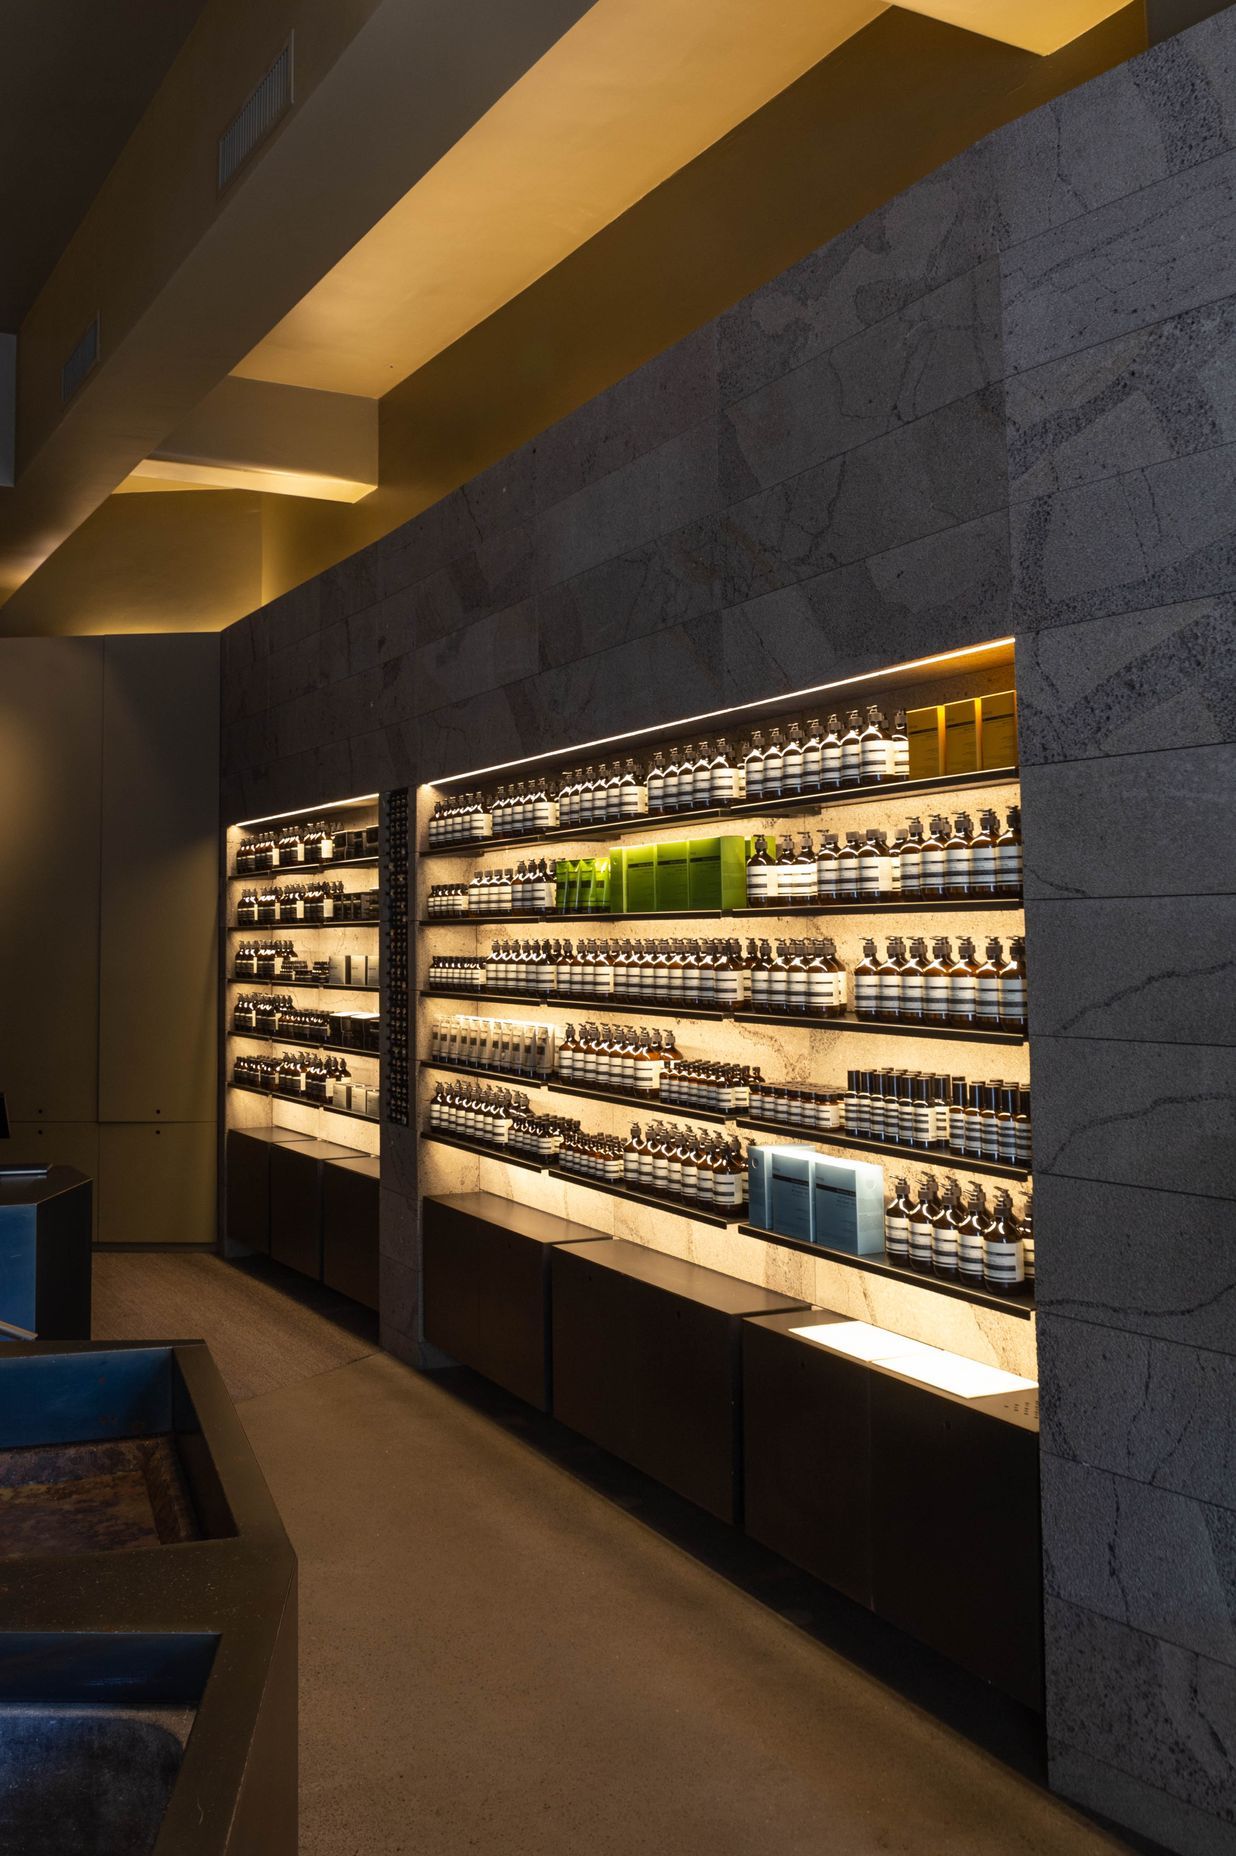 Aesop's Auckland store was designed with Timaru bluestone as a feature.